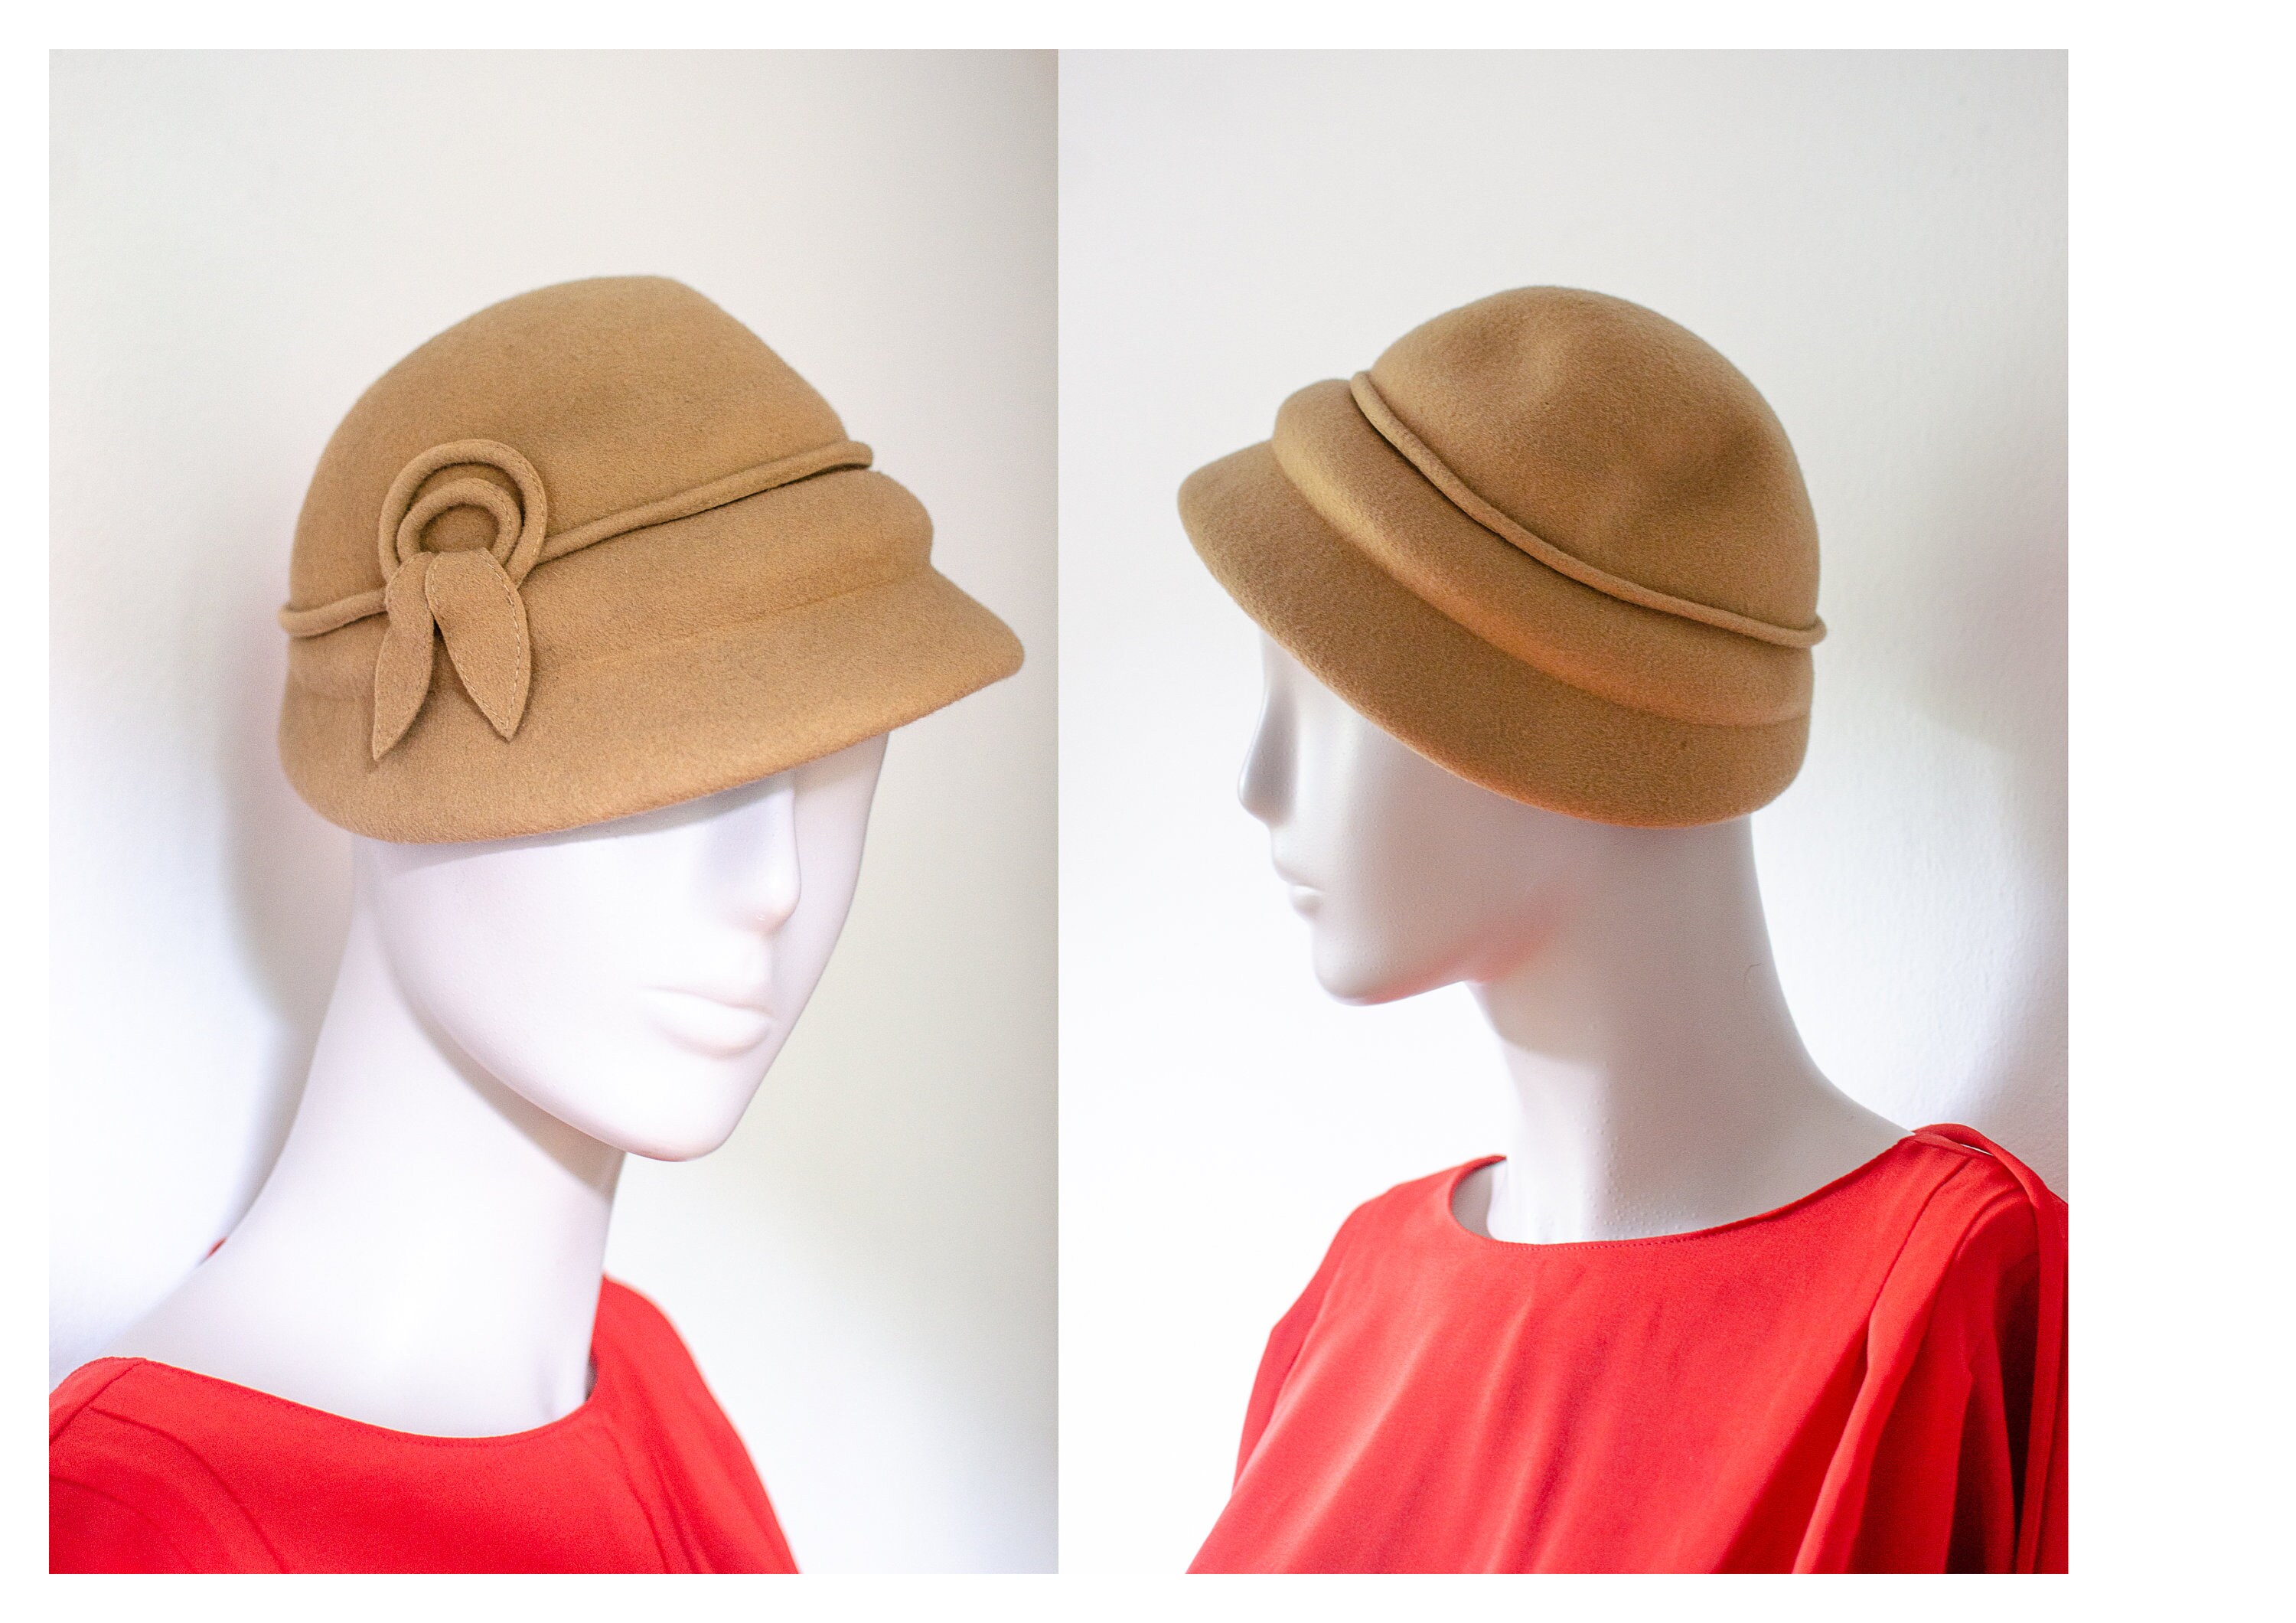 Accessories Hats & Caps Formal Hats Cloche Hats Vintage 1960s Cloche hat Brown Gatsby Downtown 1920s Marida Springflex Small 